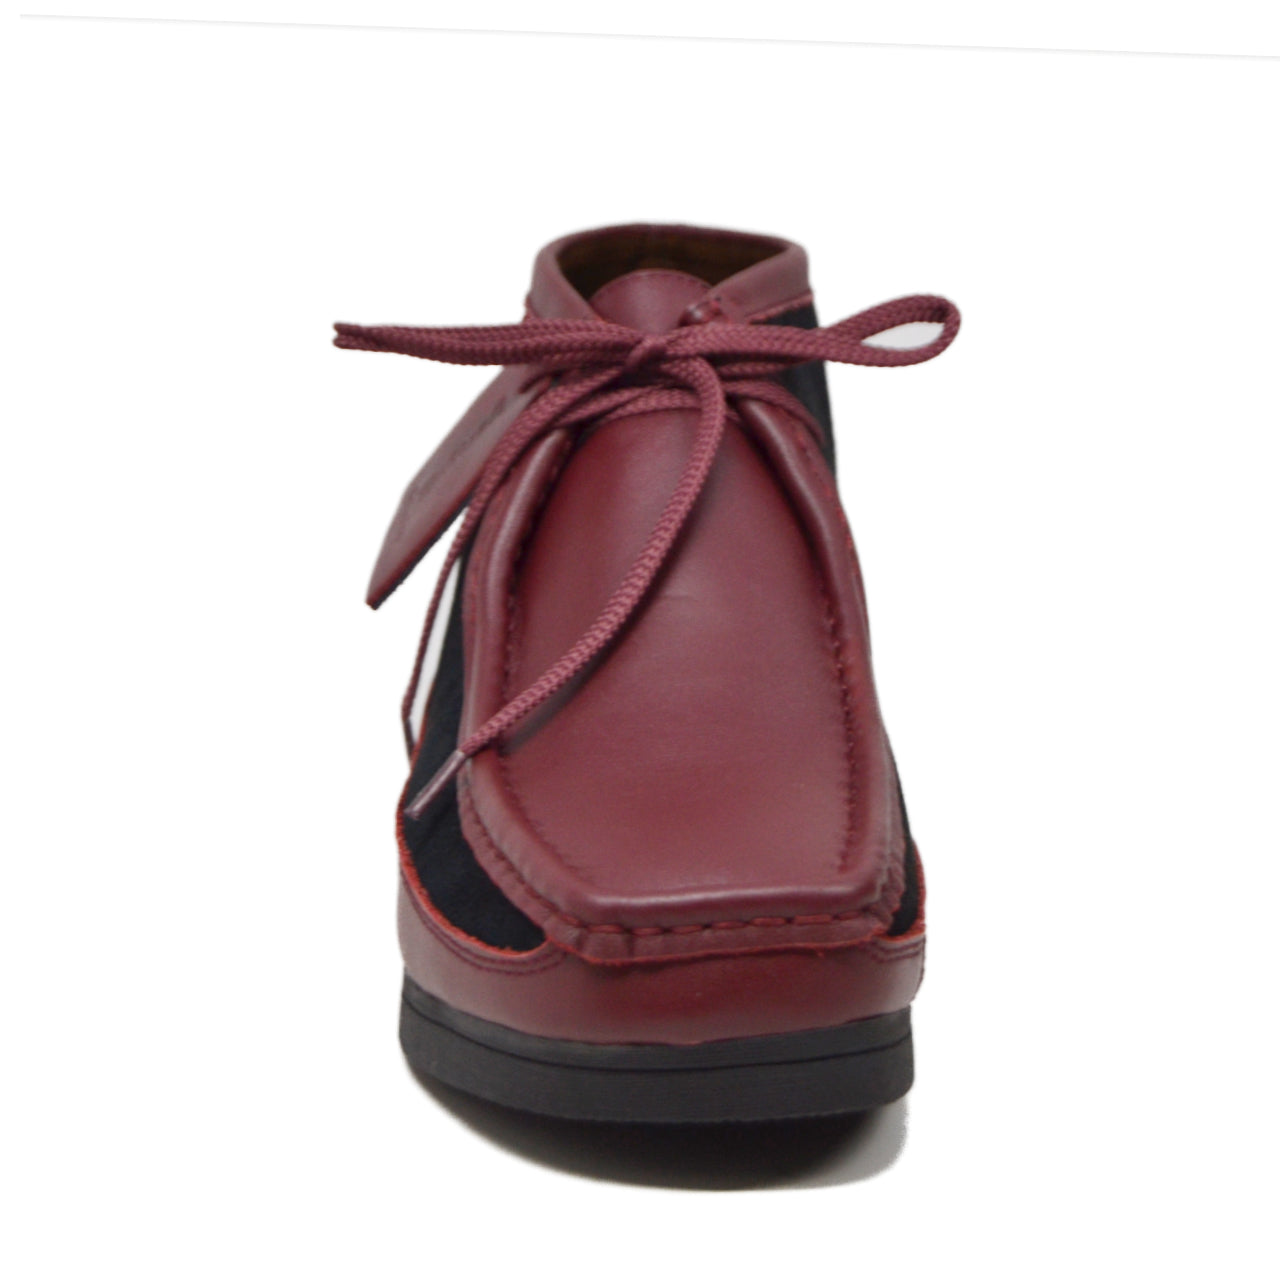 British Walkers New Castle Wallabee Boots Men's Burgundy and Black Suede and Leather Ankle Boots